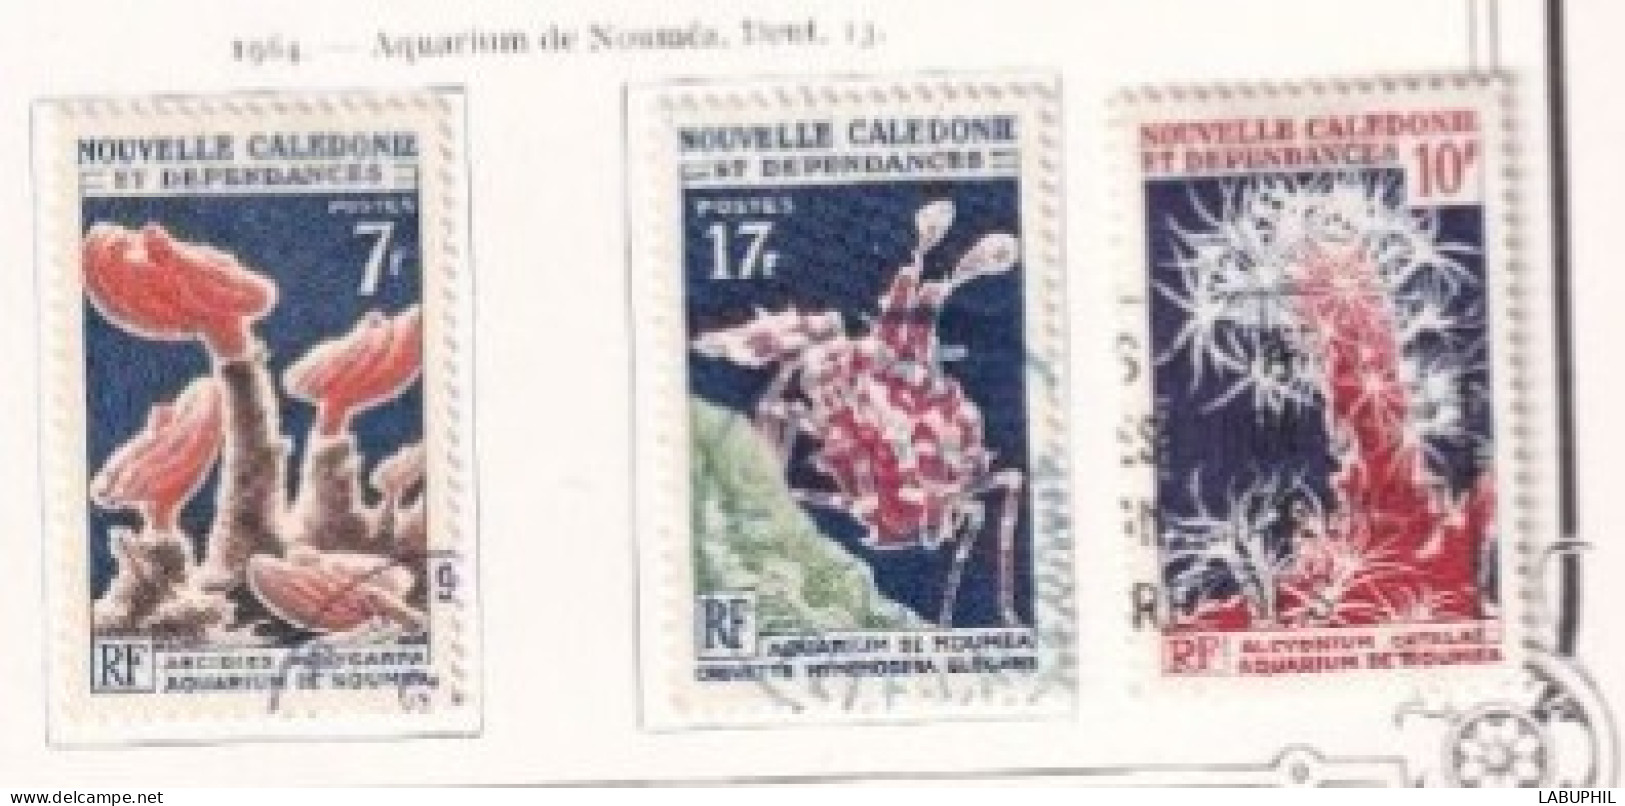 NOUVELLE CALEDONIE Dispersion D'une Collection Oblitéré Used  1964 - Used Stamps